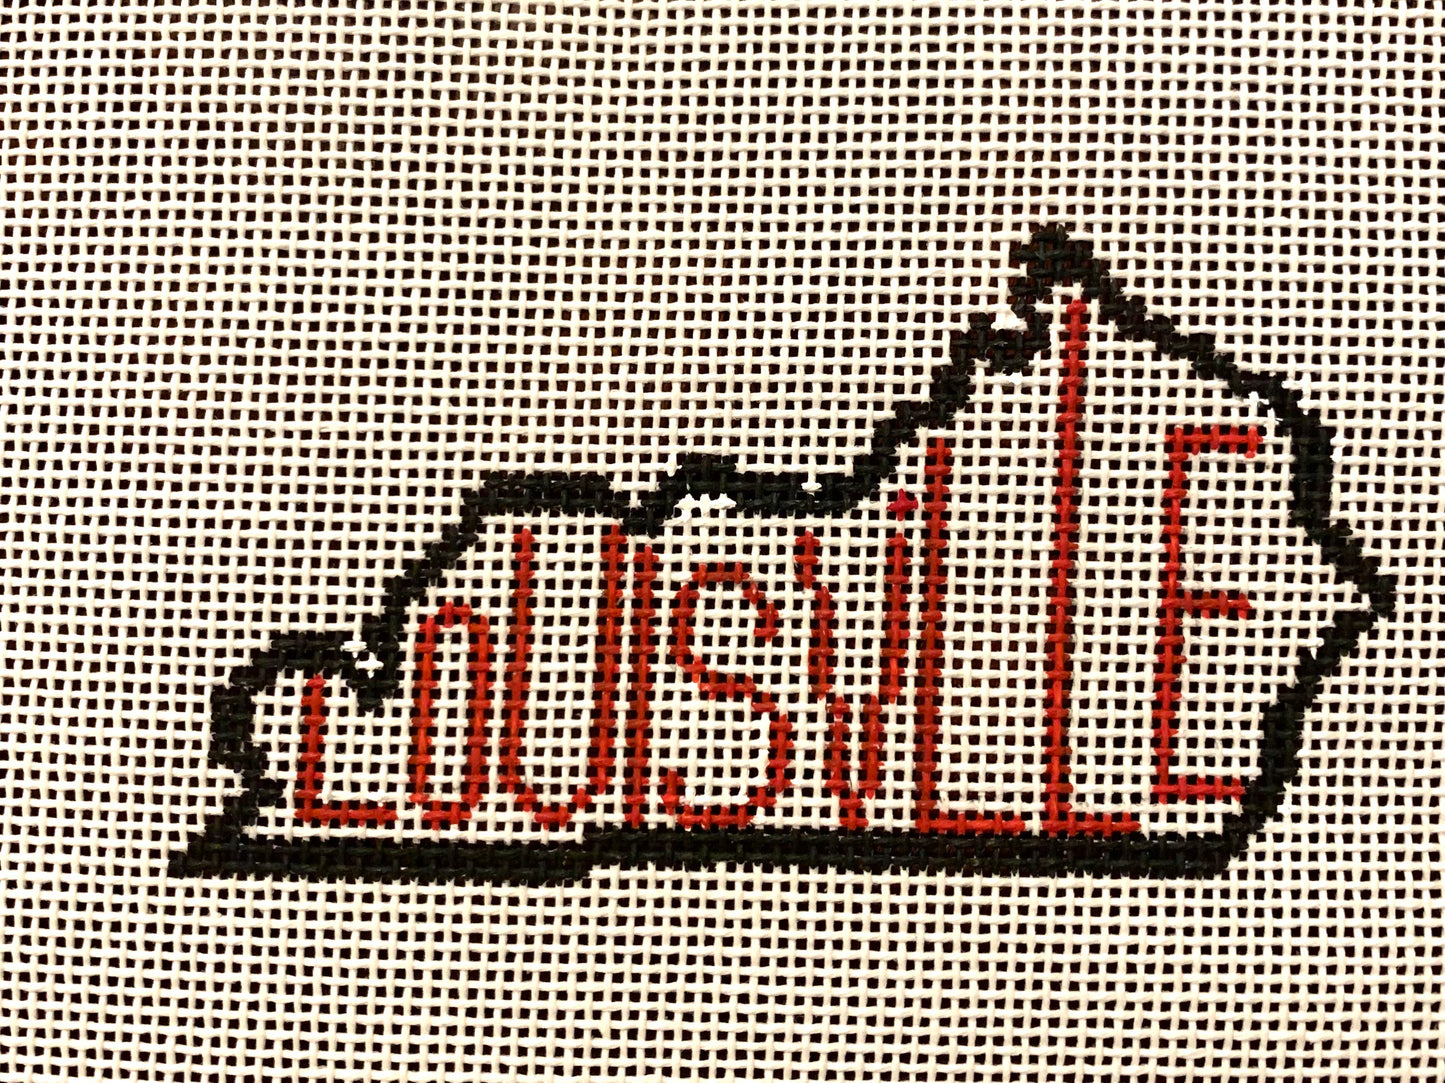 State of Kentucky Outline “Louisville”